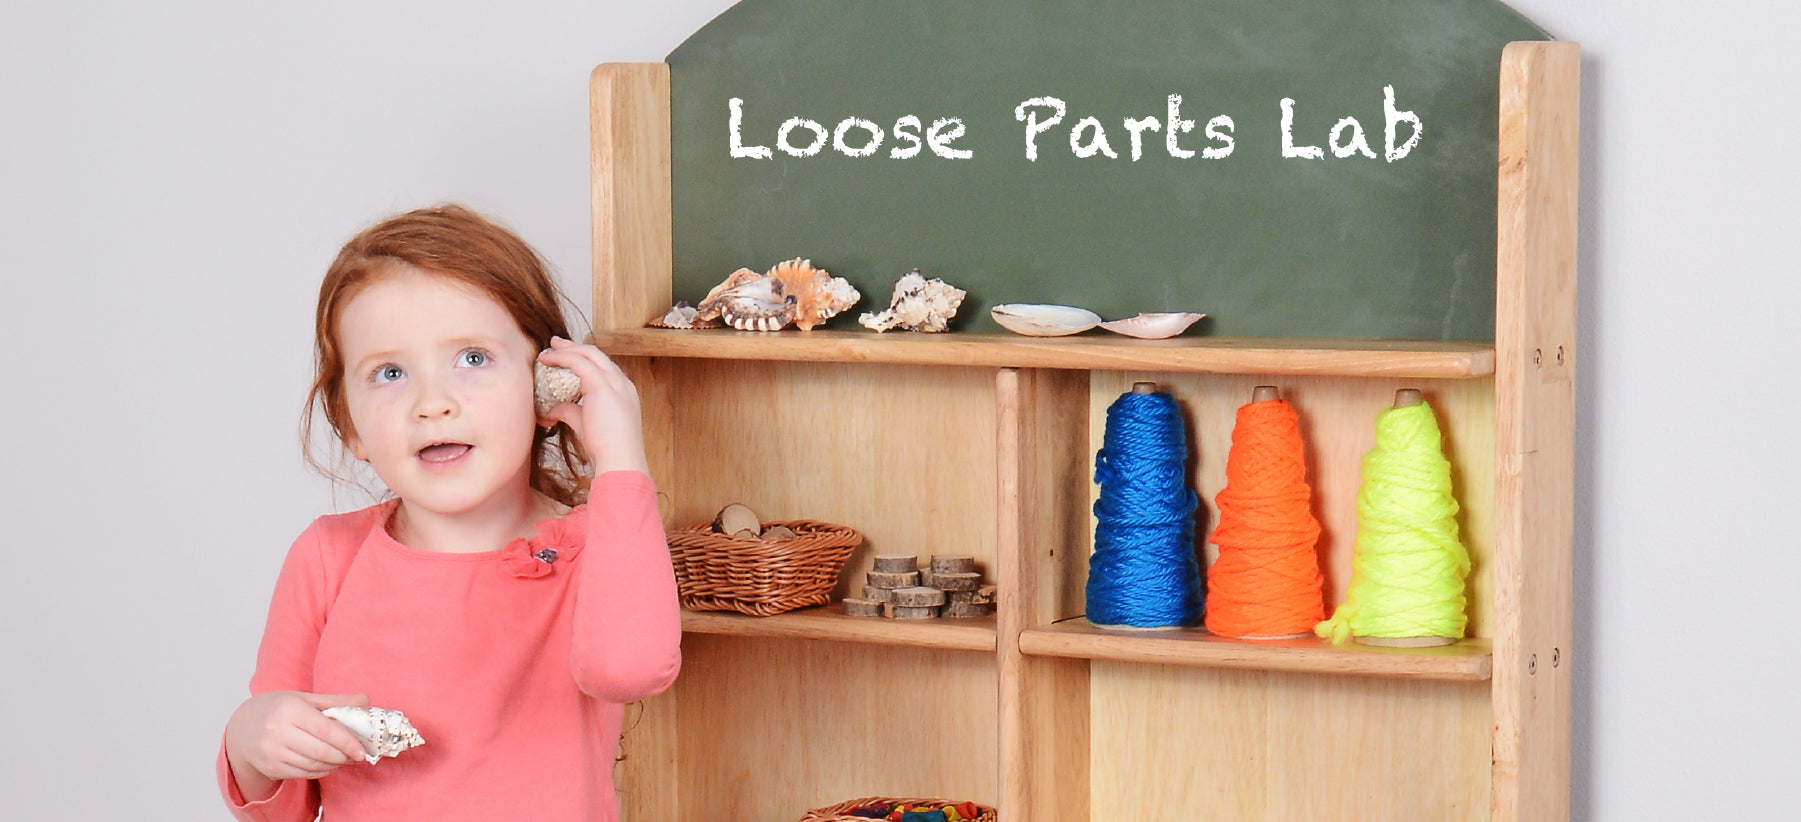 Hands on Play: Just What Are Loose Parts?